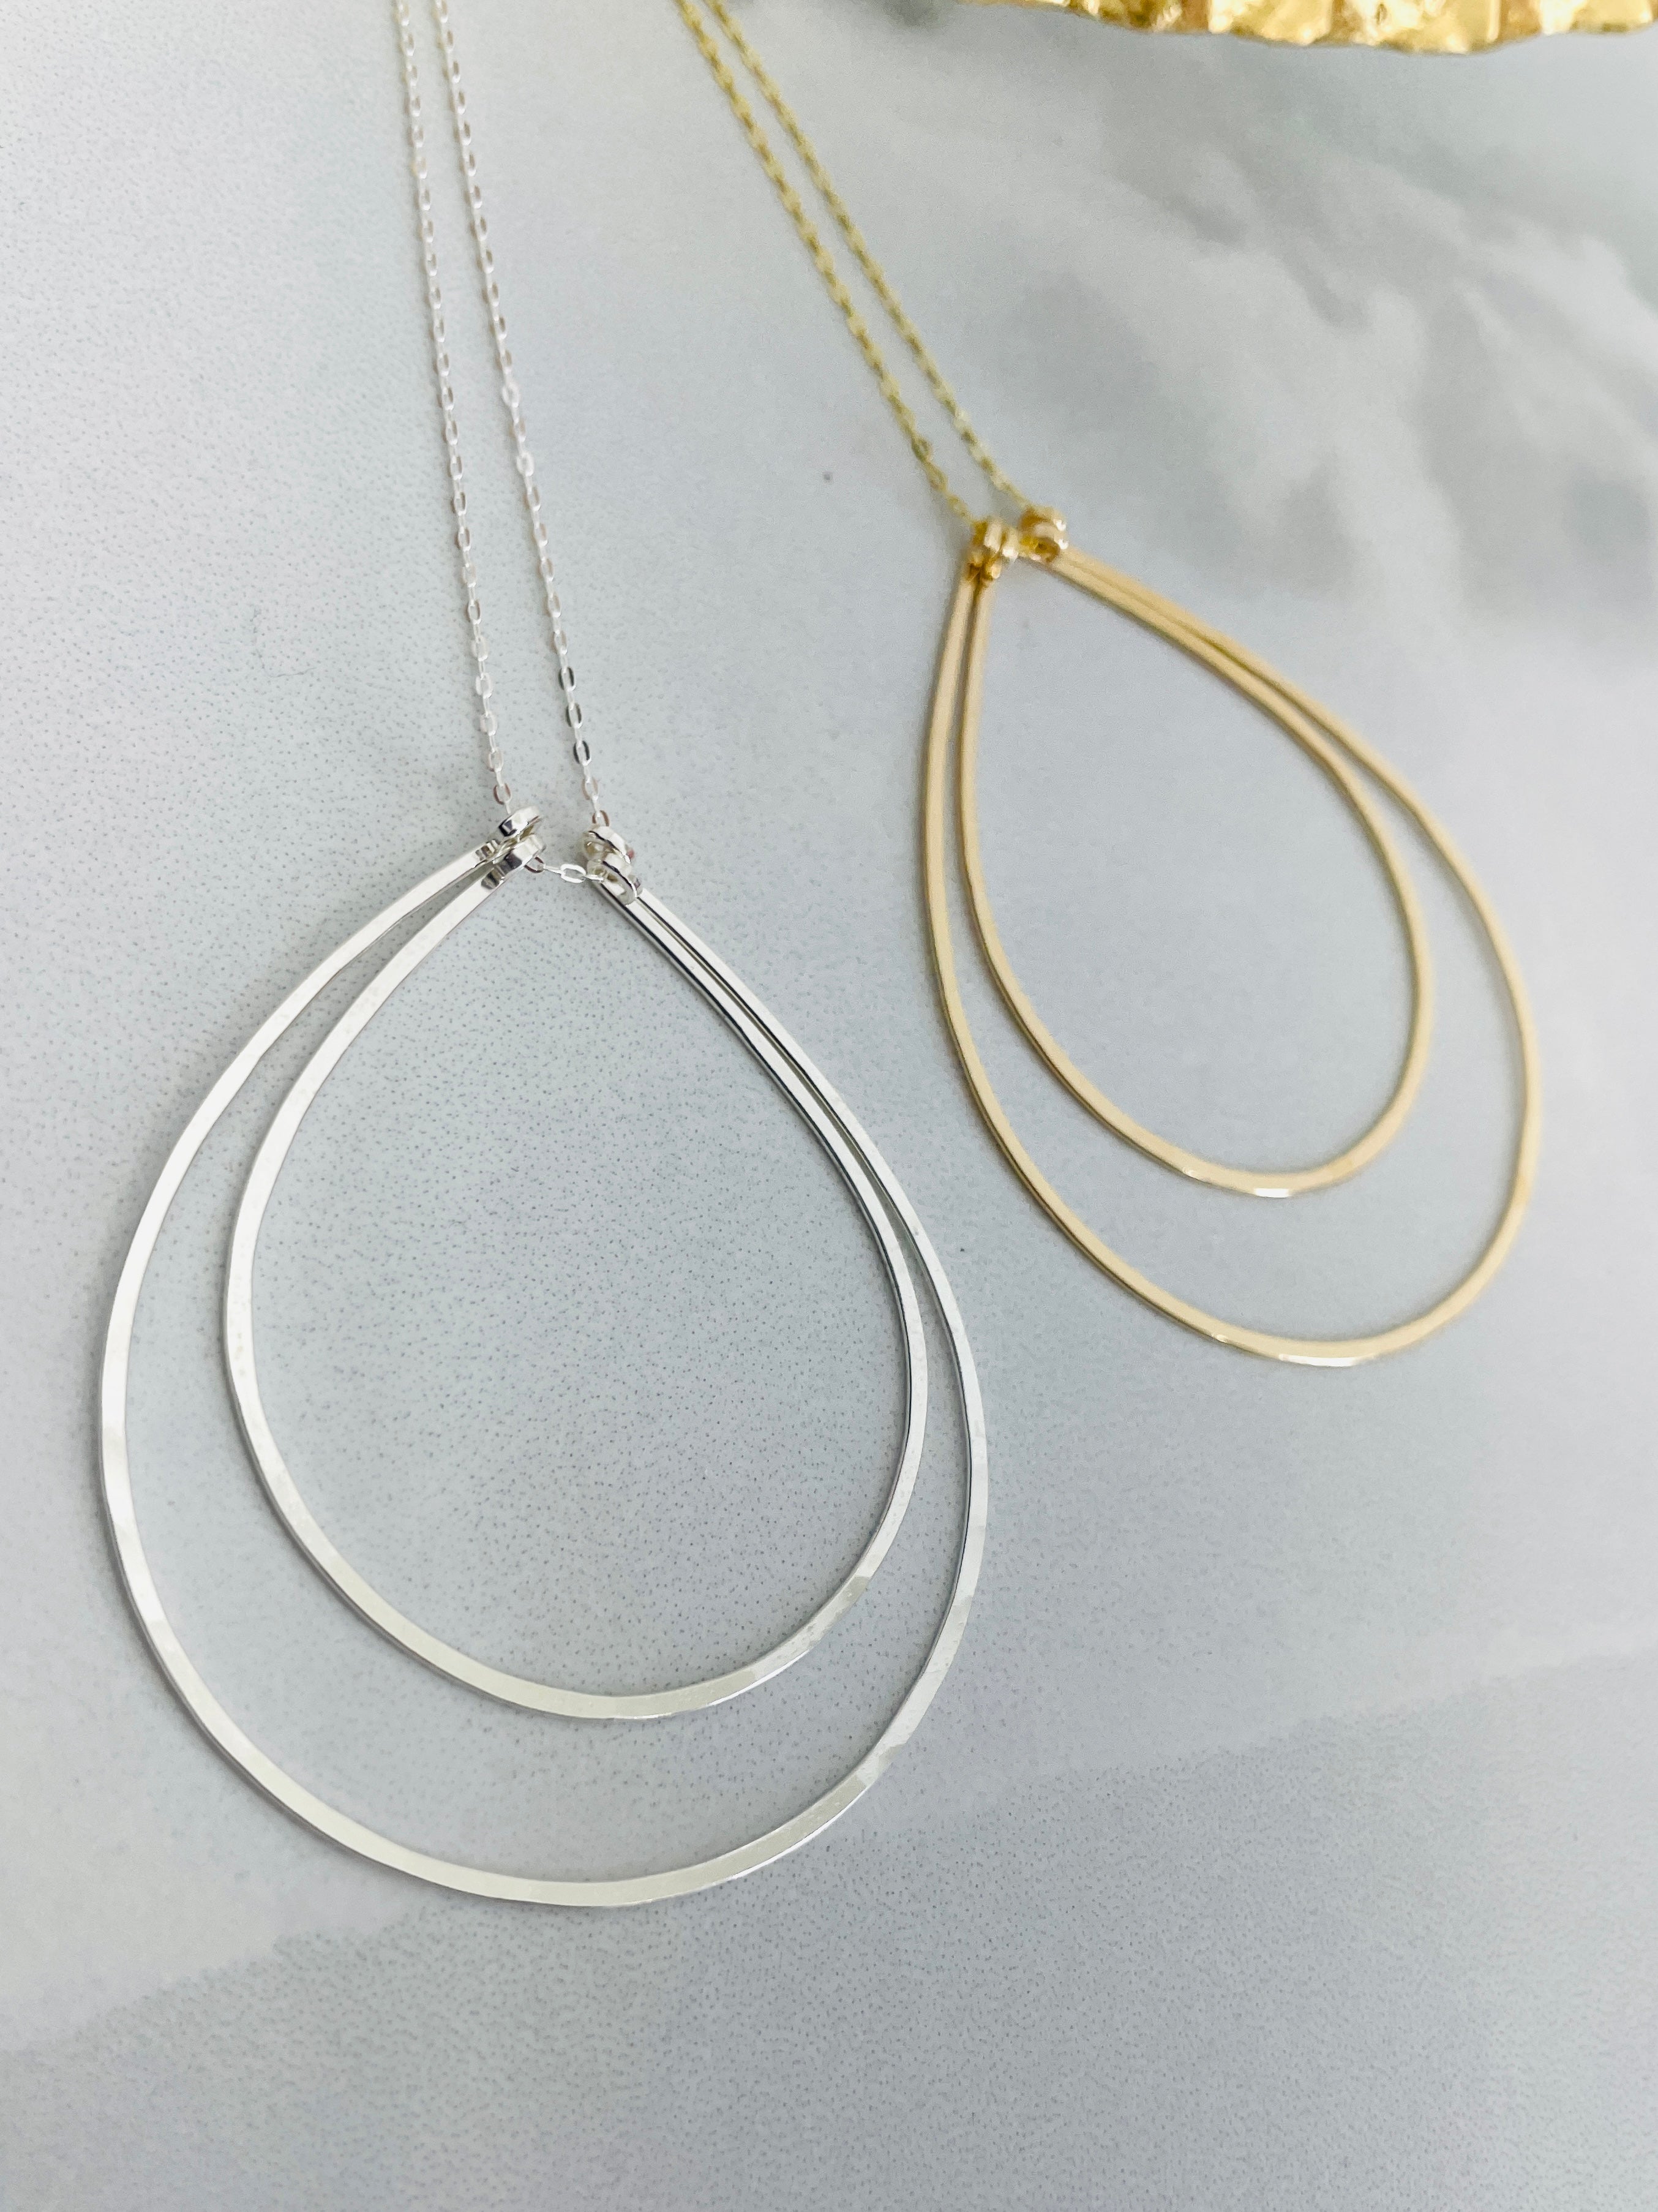 J.Mills Studio-Forged Silver Double Nested Teardrop Necklace